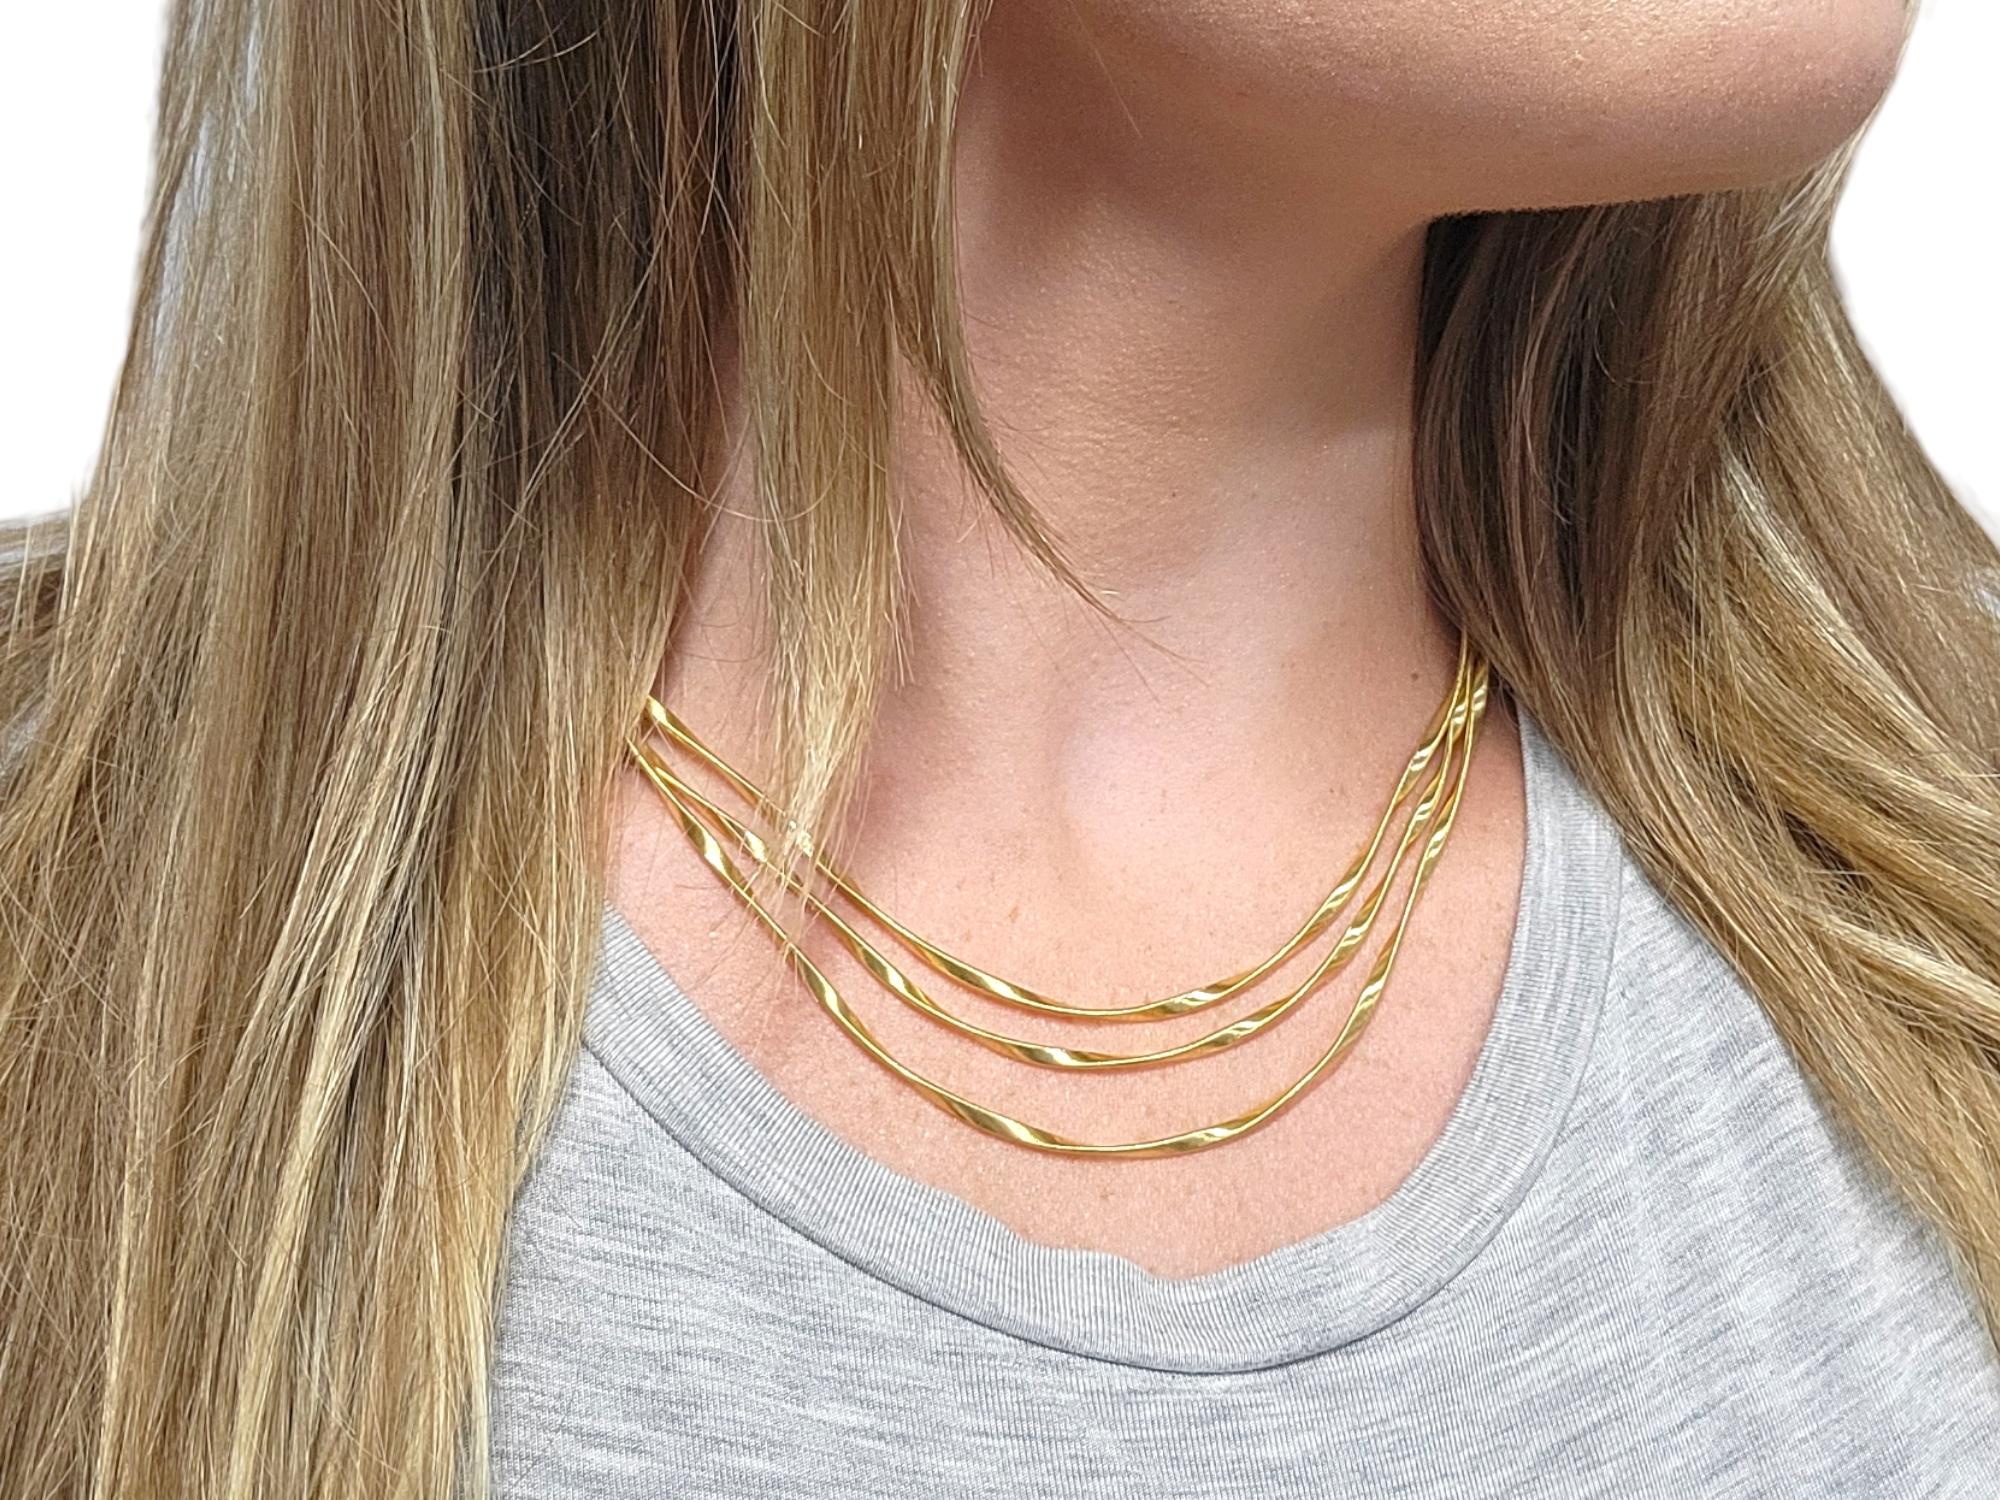 MarCo Bicego Marrakech Collection Three-Strand Necklace in 18 Karat Yellow Gold For Sale 6